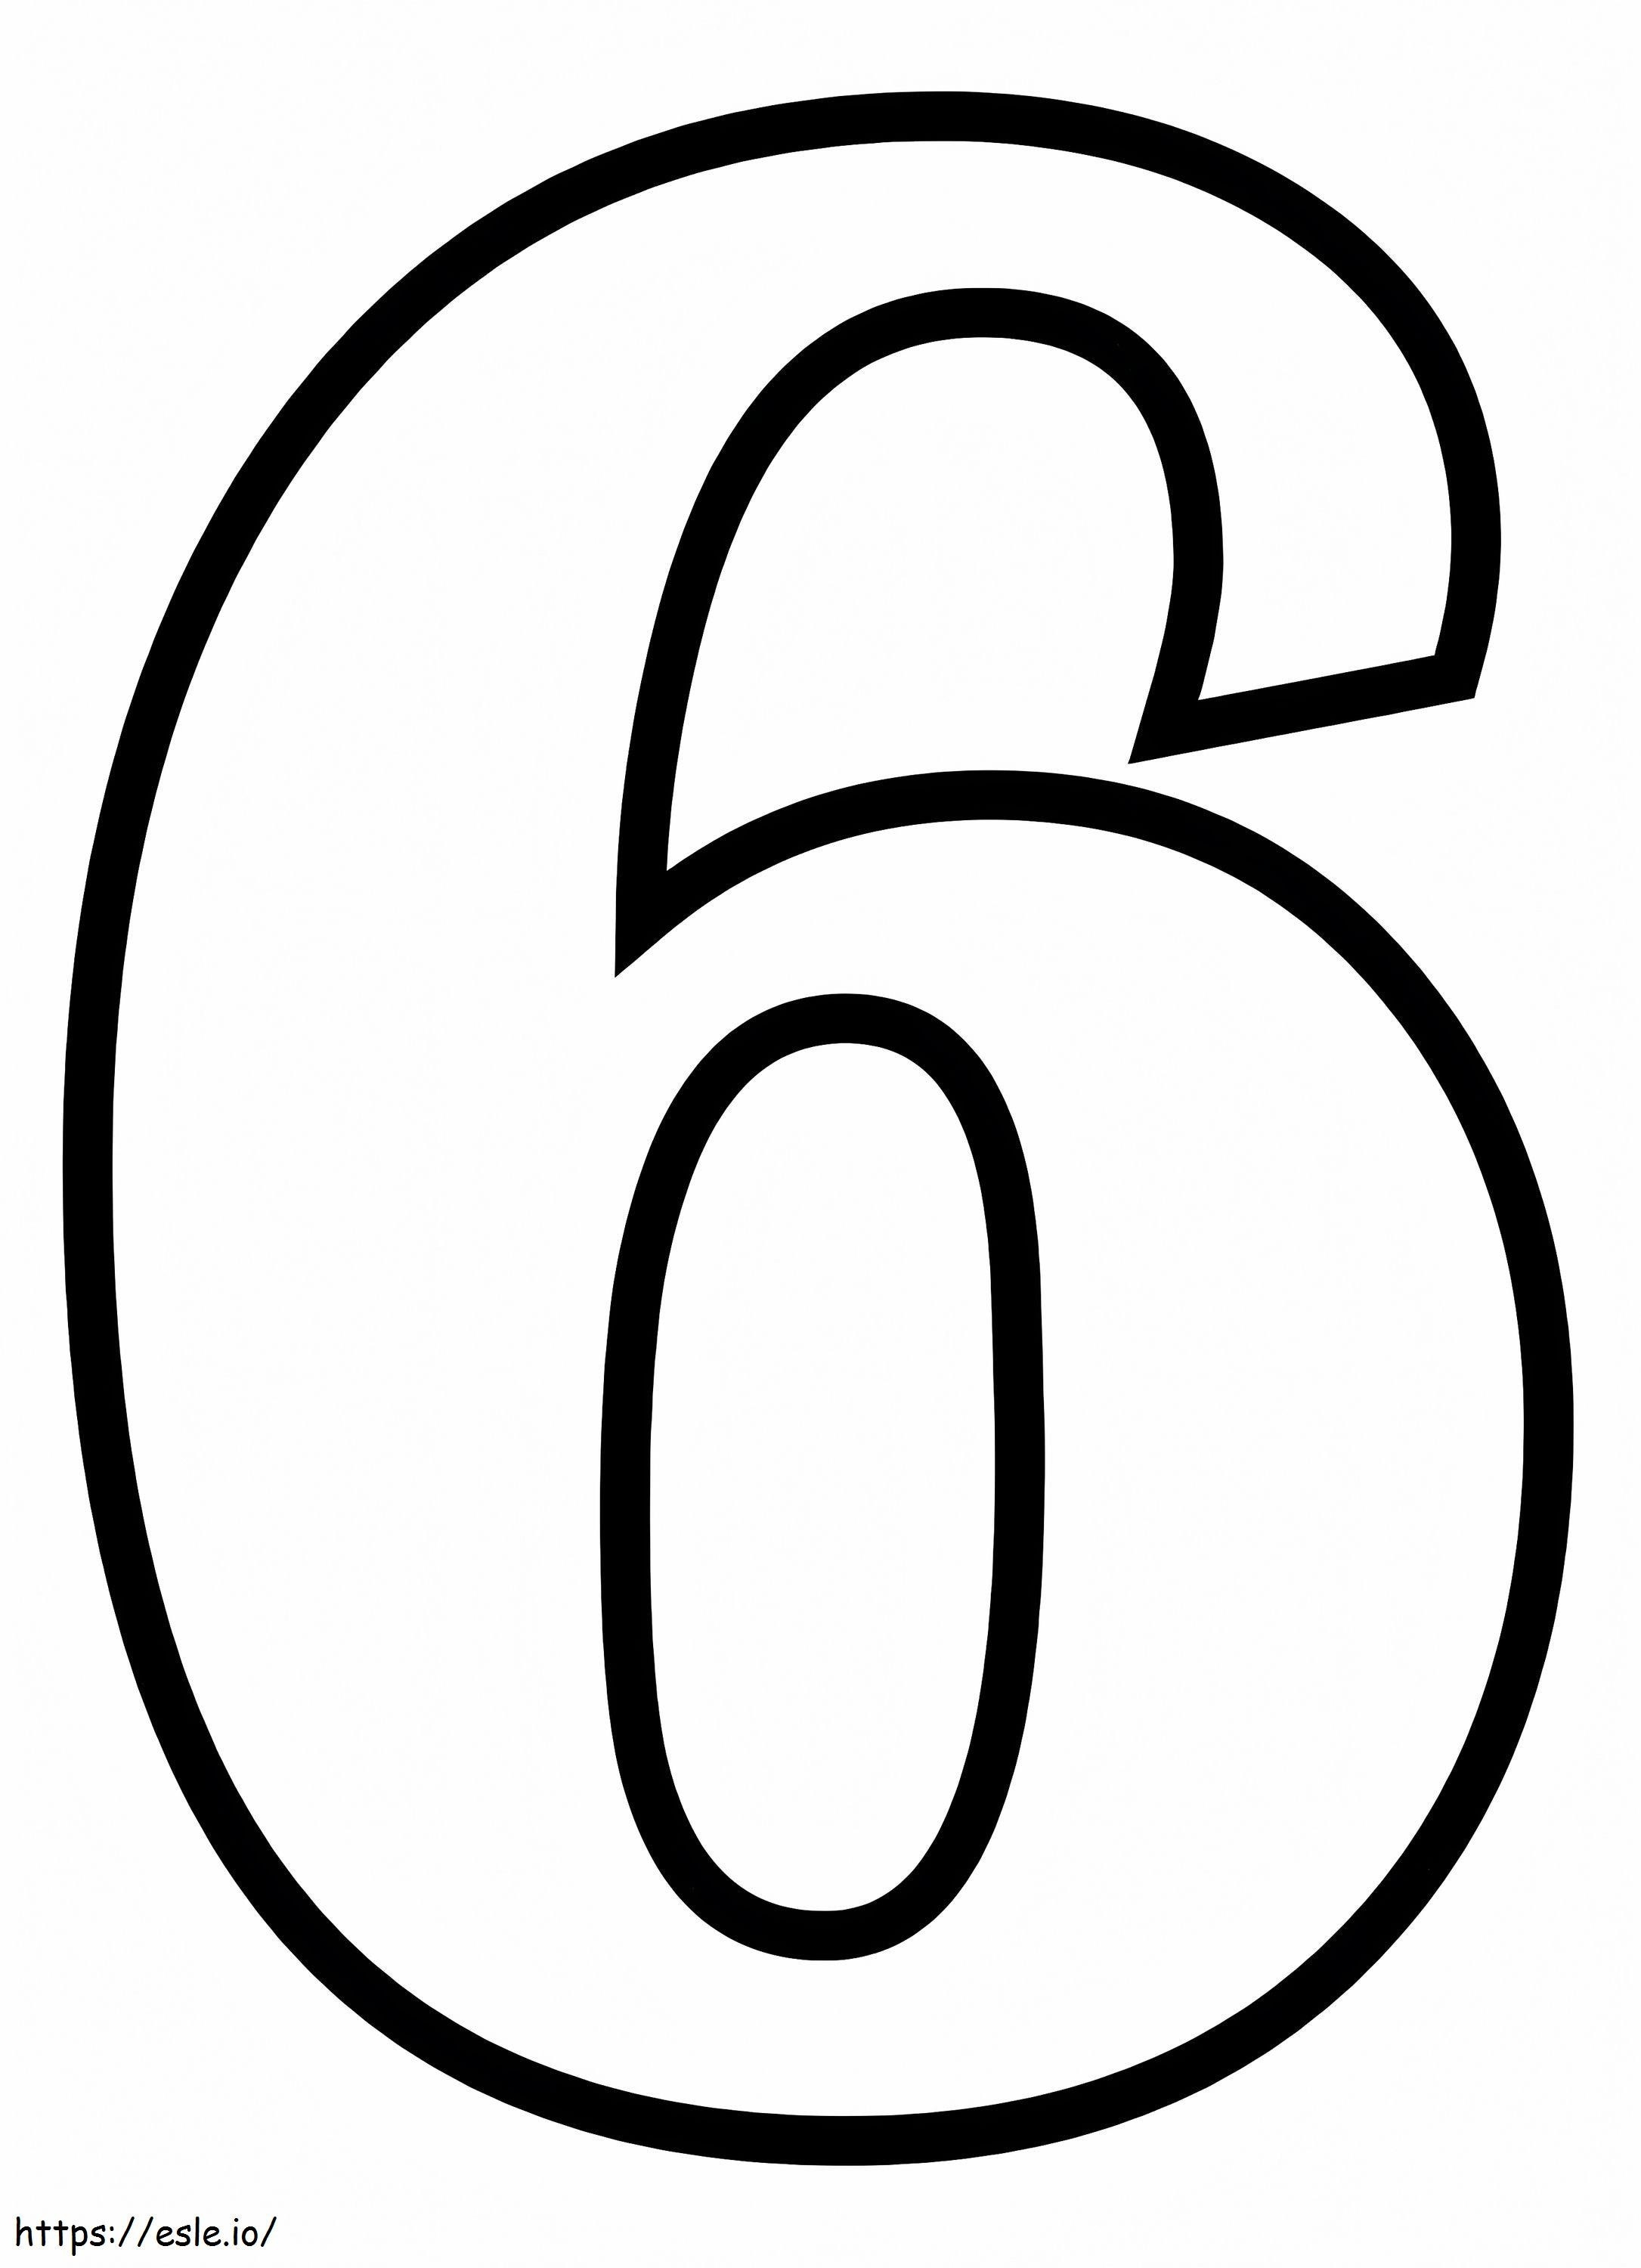 Simple Number 6 coloring page